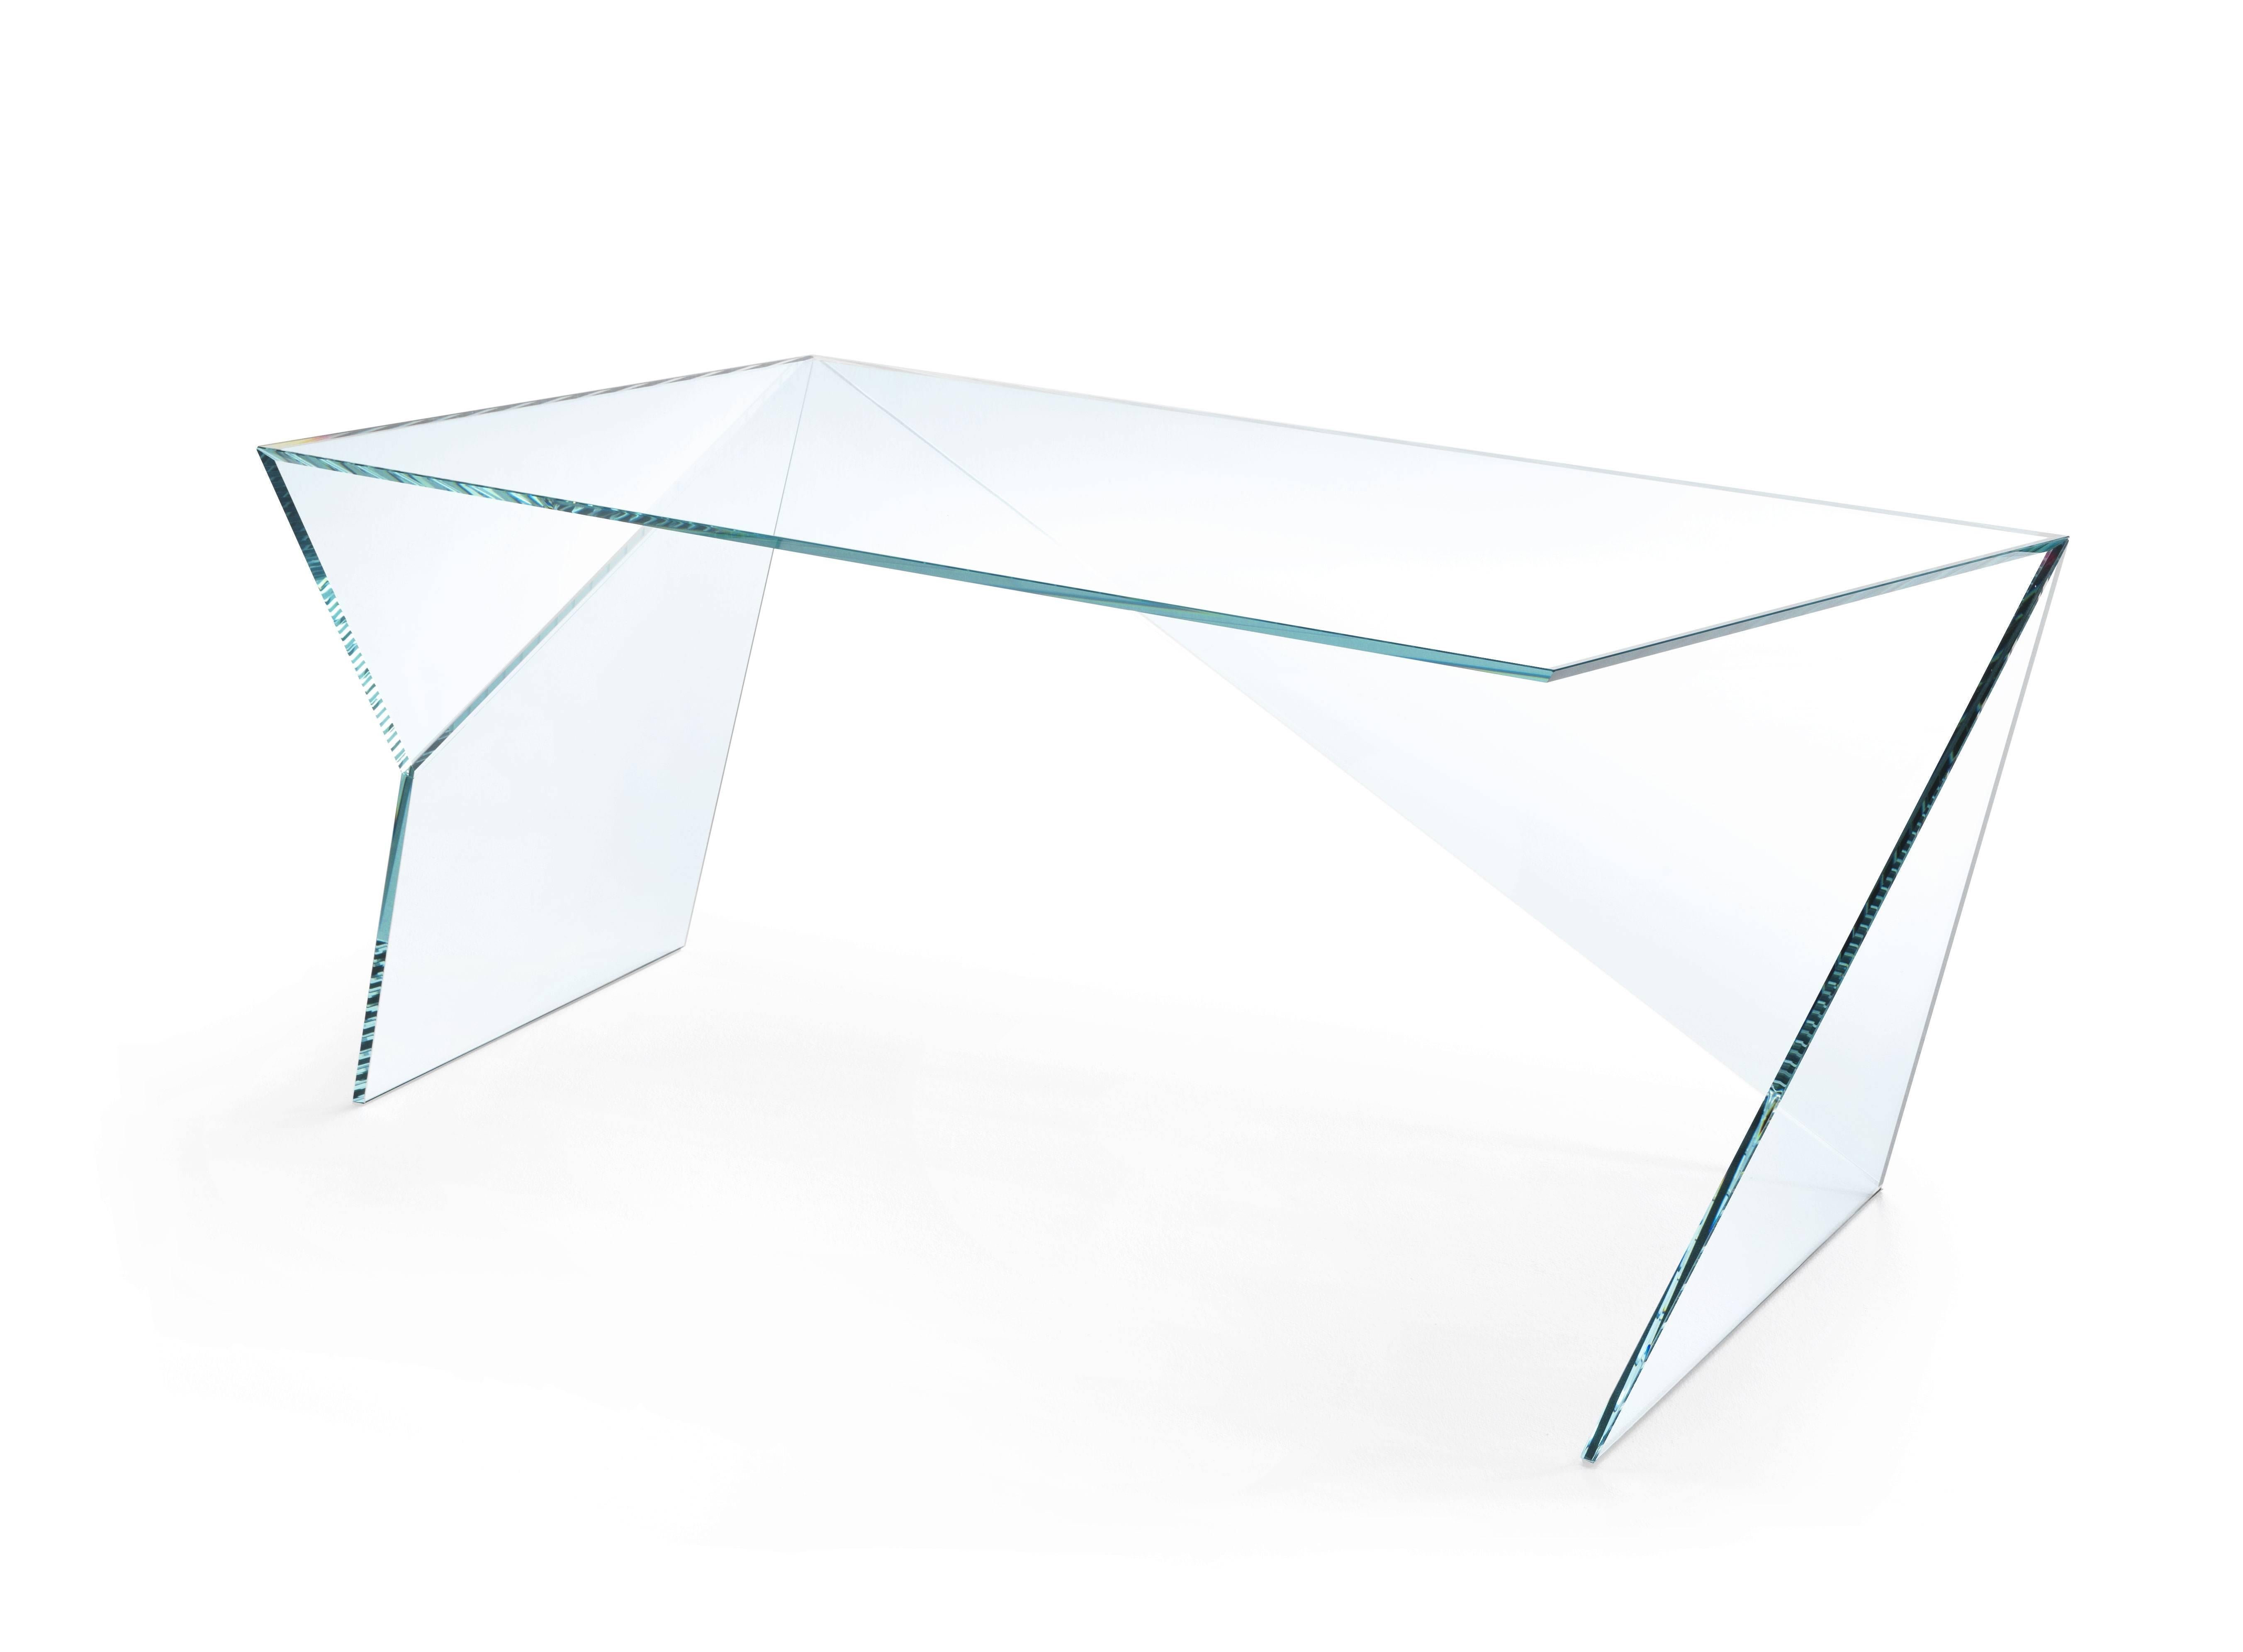 The executive desk 'Origami' is made of extra-clear crystal glass. Each sheet of extra-clear crystal glass is cut and ground with extreme precision, then the sheets are assembled by hand, having to fit together perfectly, the gluing operation